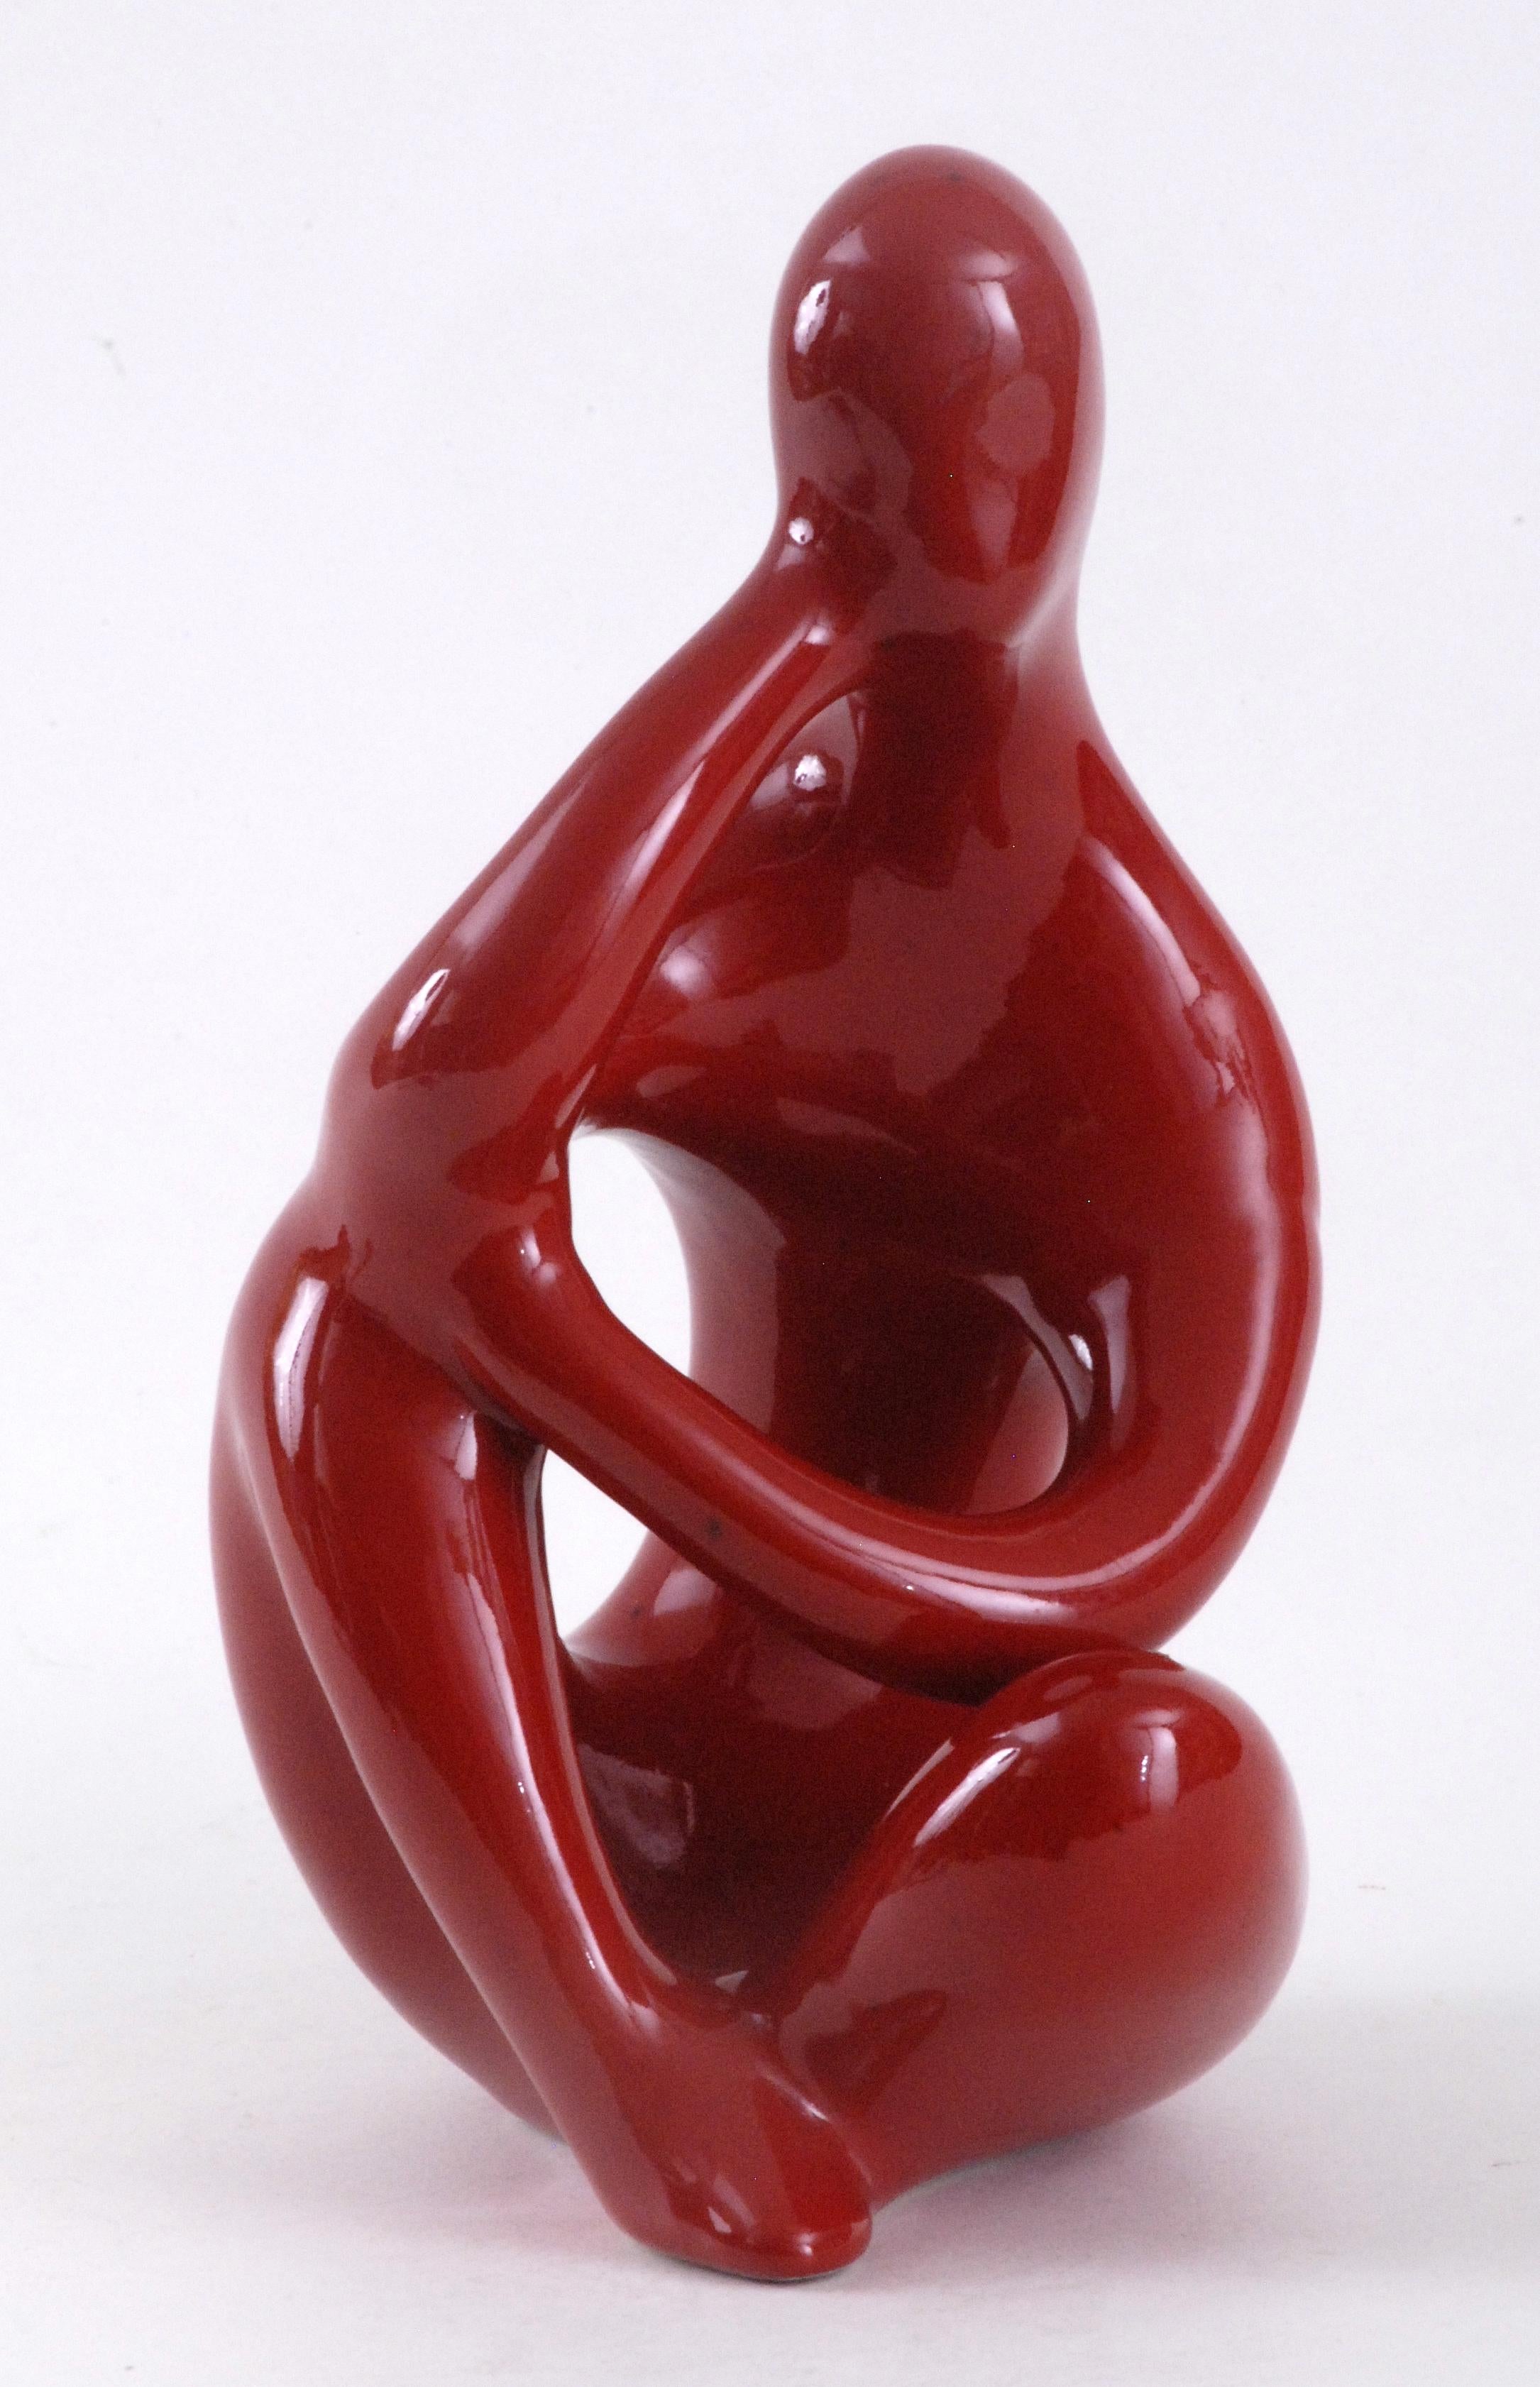 Ellis ceramics were set up in Melbourne in 1953 by Czechoslovakian couple, Dasa and Milda Kratochvil. Their work is mainly slip cast earthenware of which this red figure is an example. Highly stylized and with a brilliant rich red glaze this piece